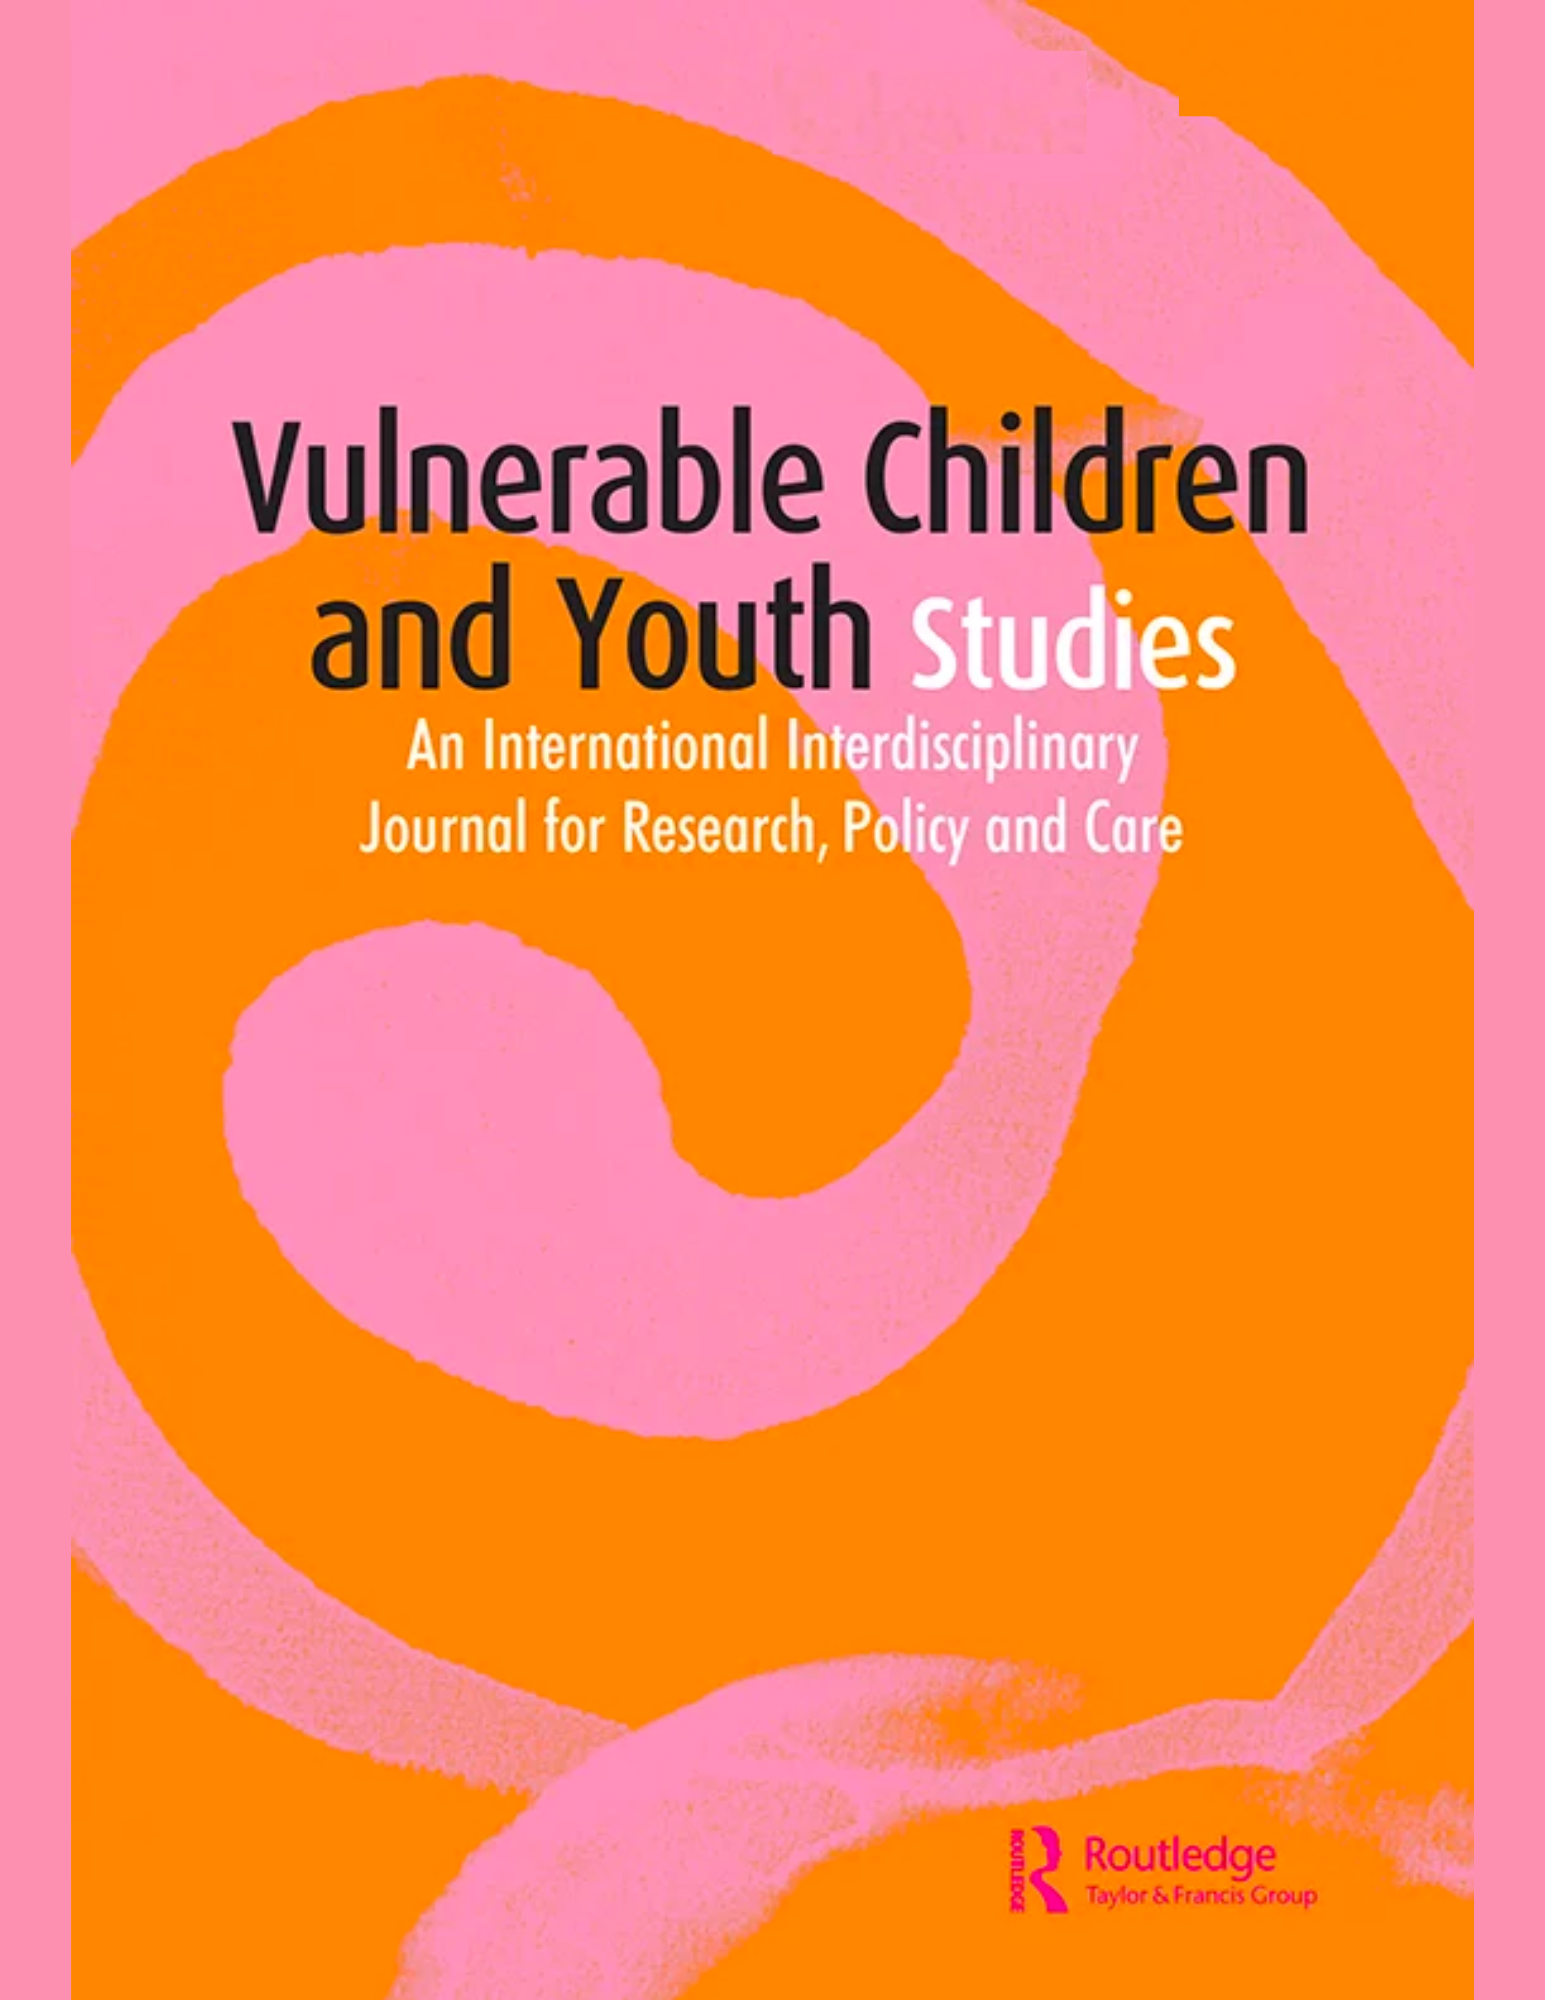 Vulnerable Children and Youth Studies journal